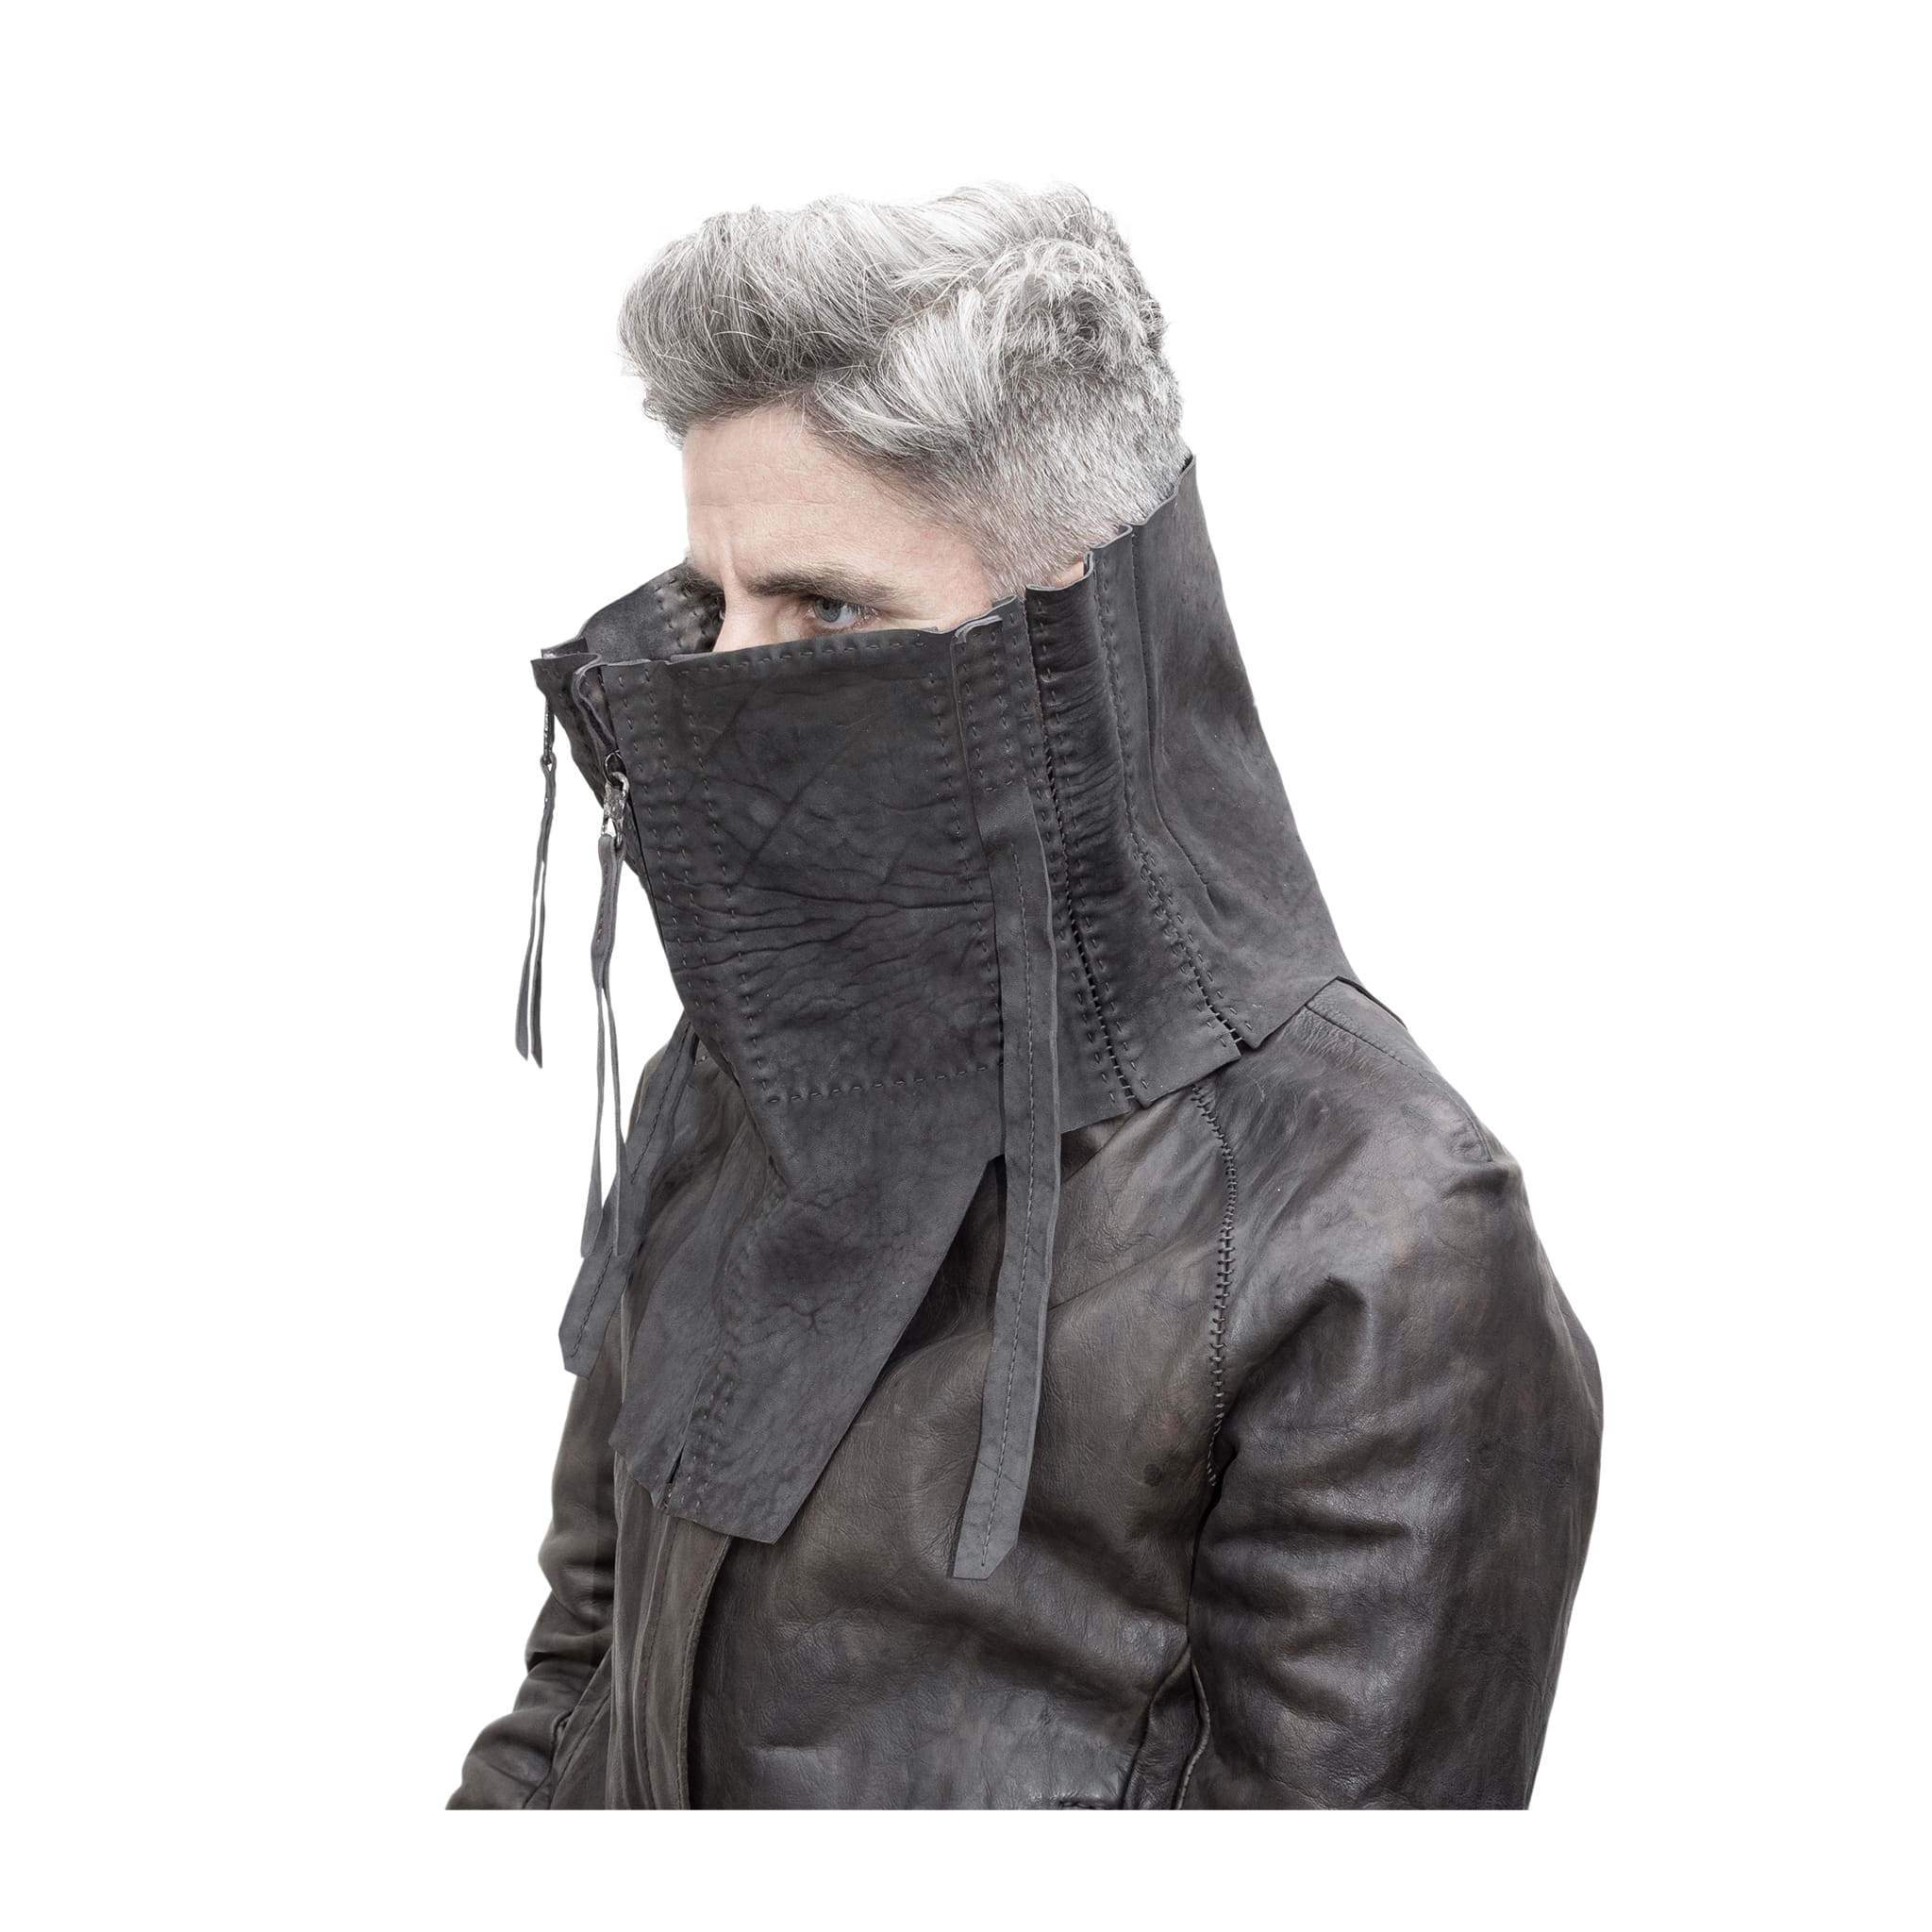 horse culatta leather snood available online at atelierskn.com